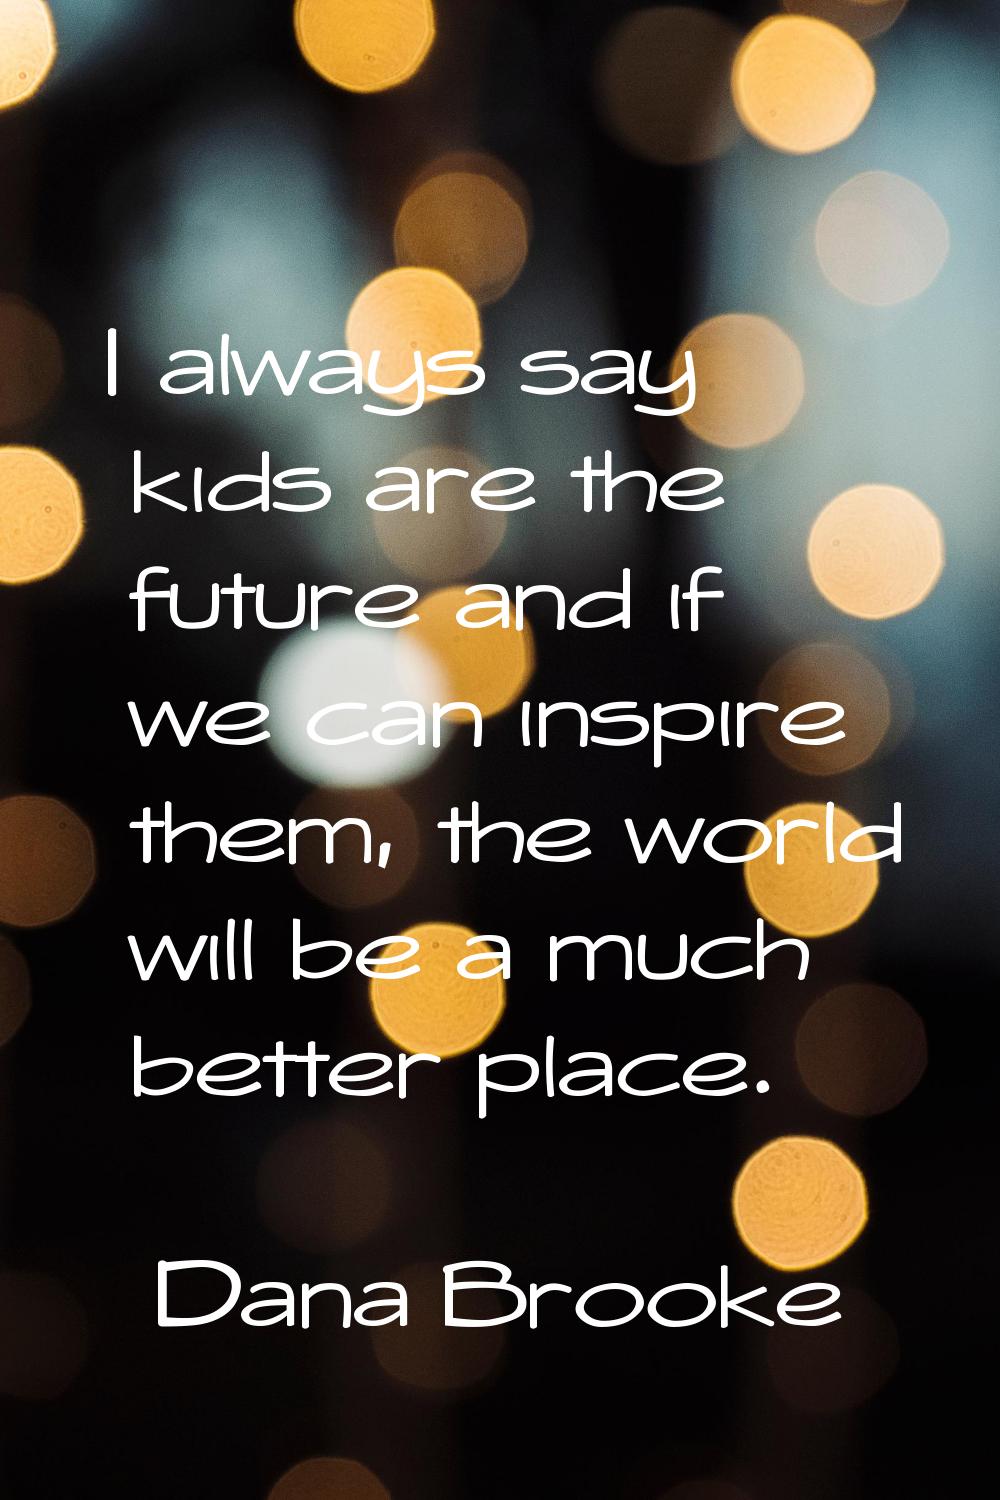 I always say kids are the future and if we can inspire them, the world will be a much better place.